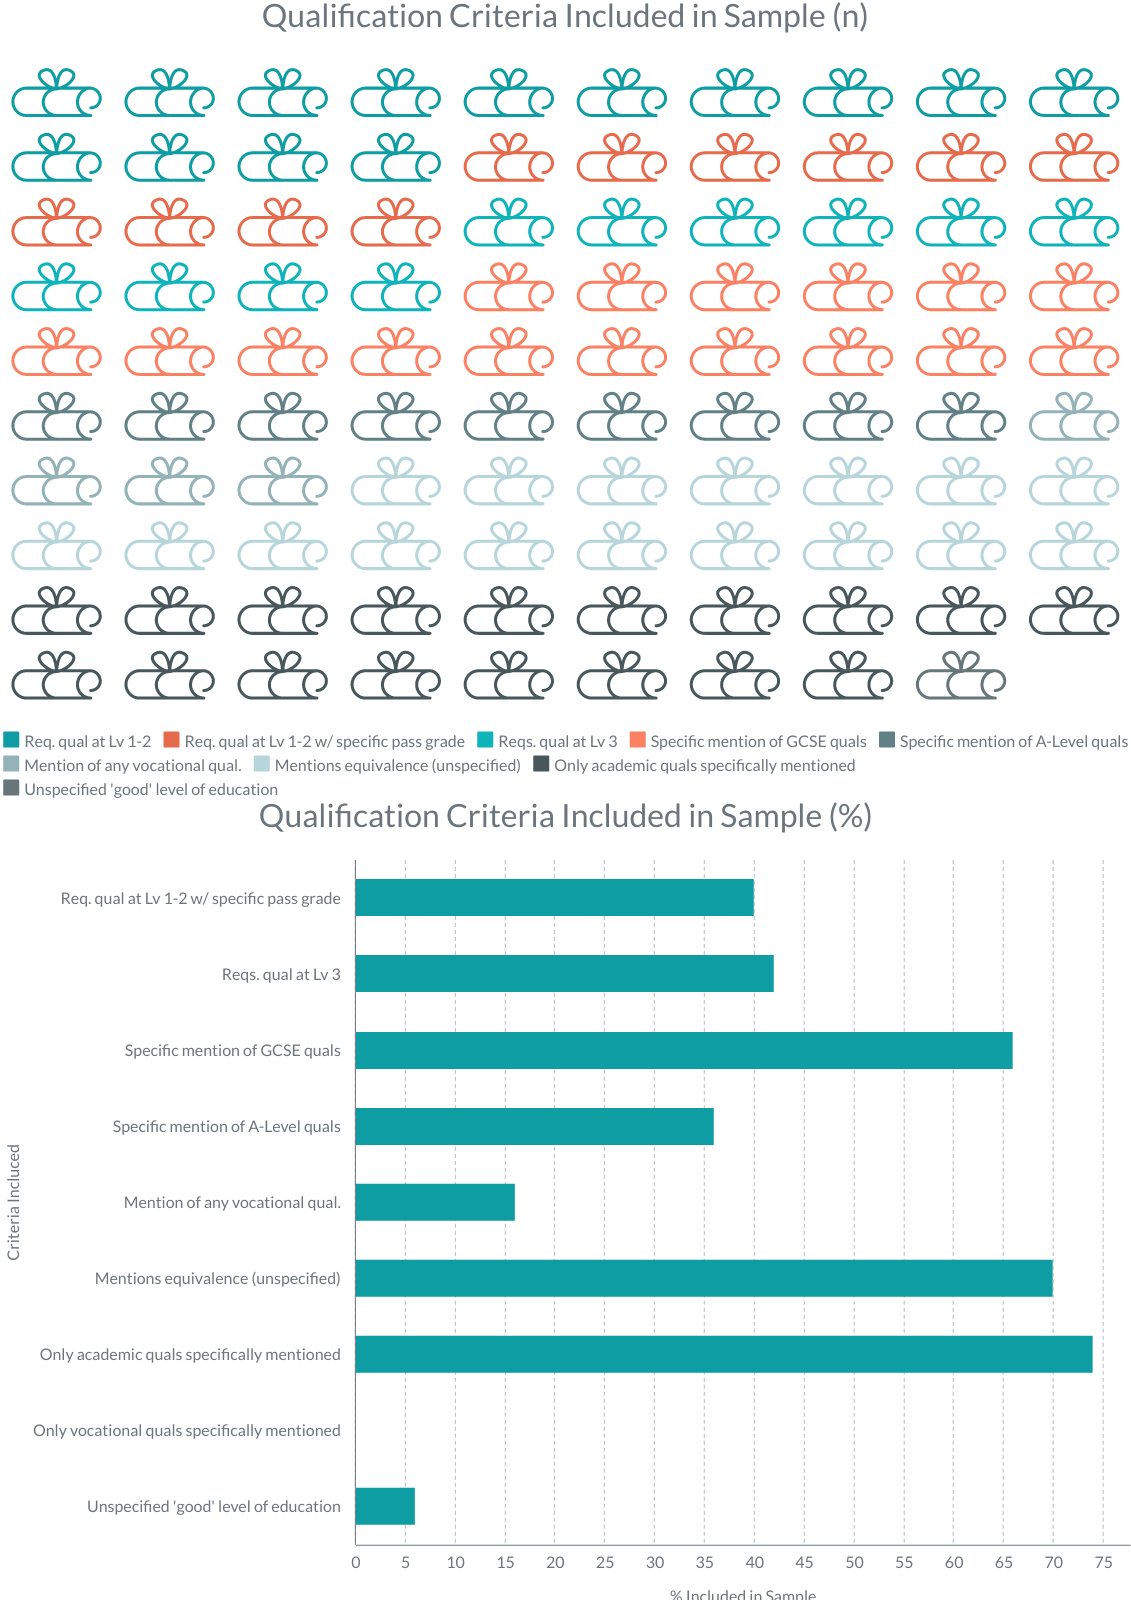 Image shows two infographics displaying data on the qualification criteria of a sample of 50 library job ads. This data is summarised in text immediately following these infographics. 